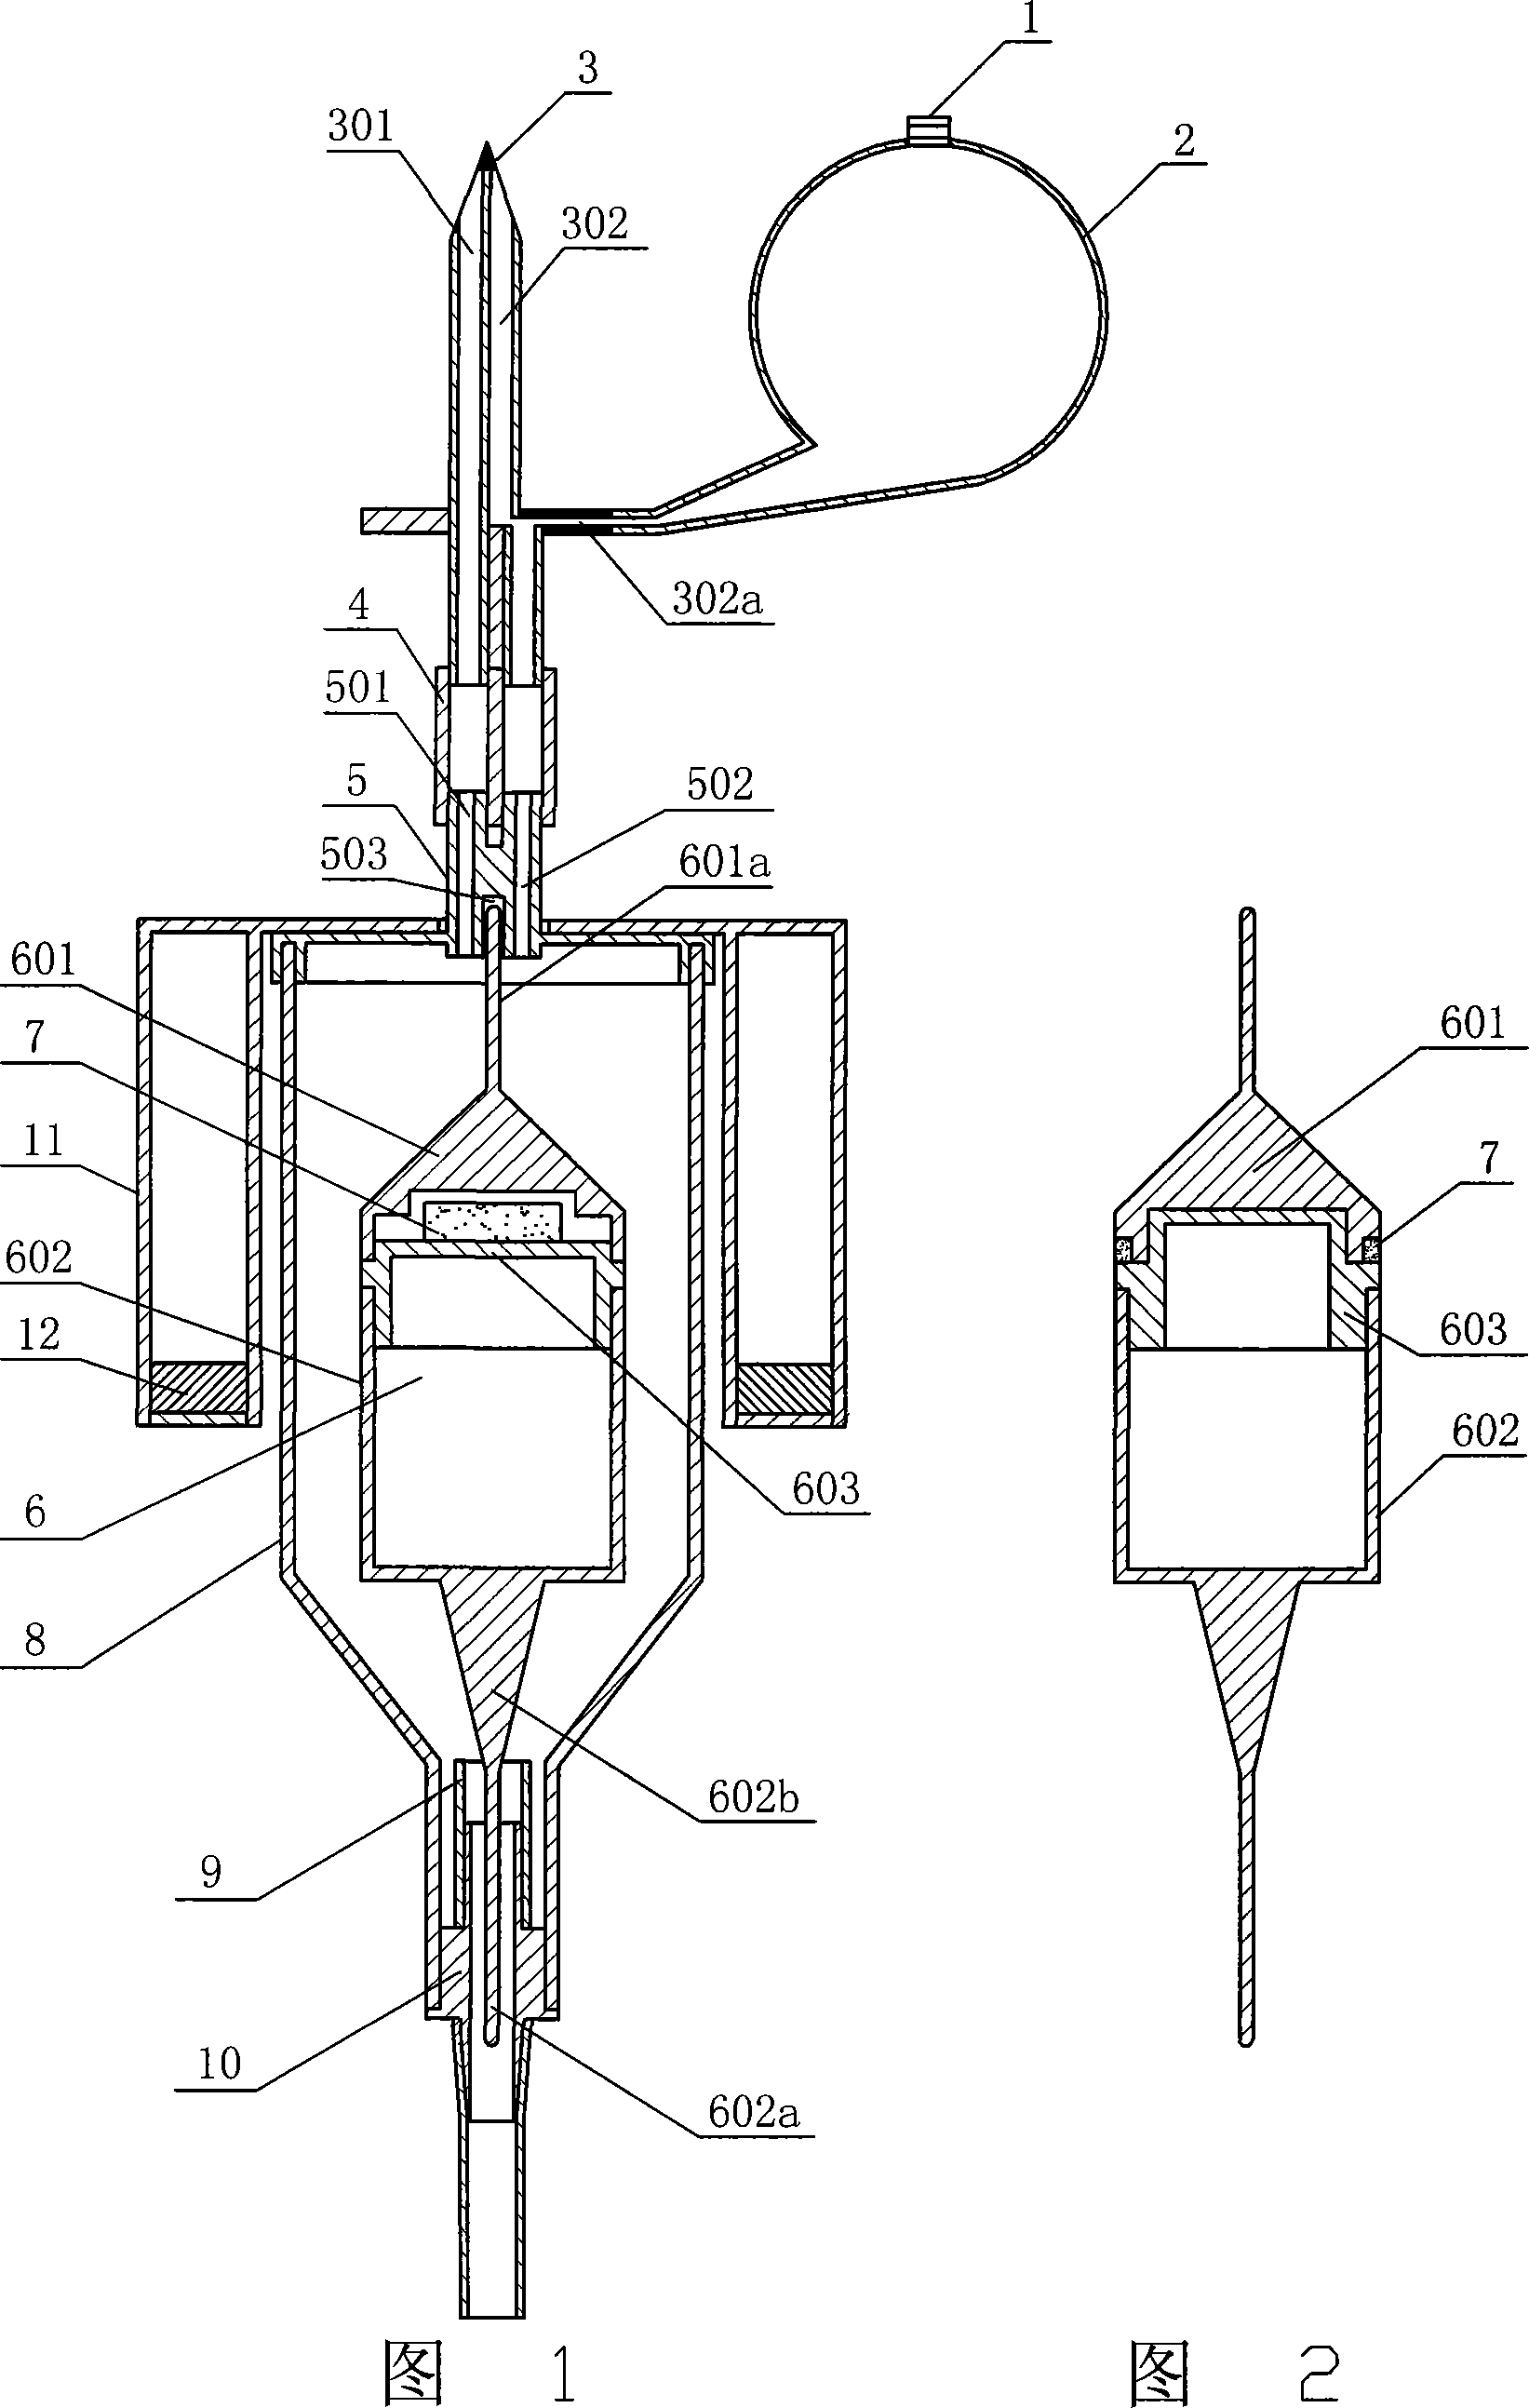 Automatically drip-stopping and alarm device for infusion device